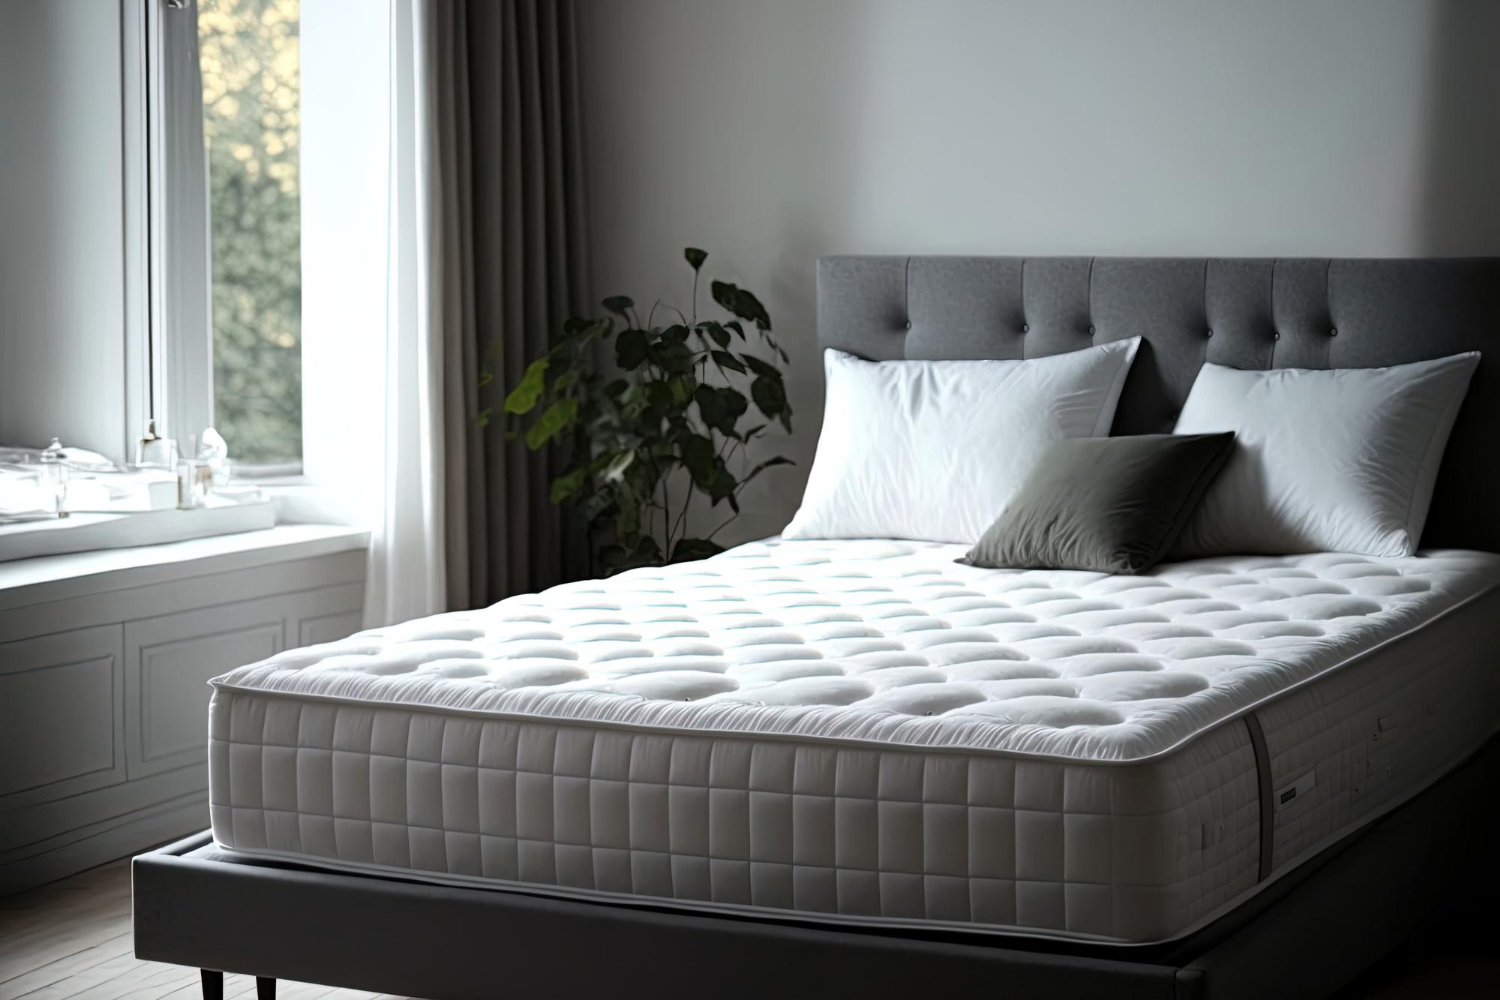 Handy Tips to Buy a Mattress for a Healthy and Happy Sleep